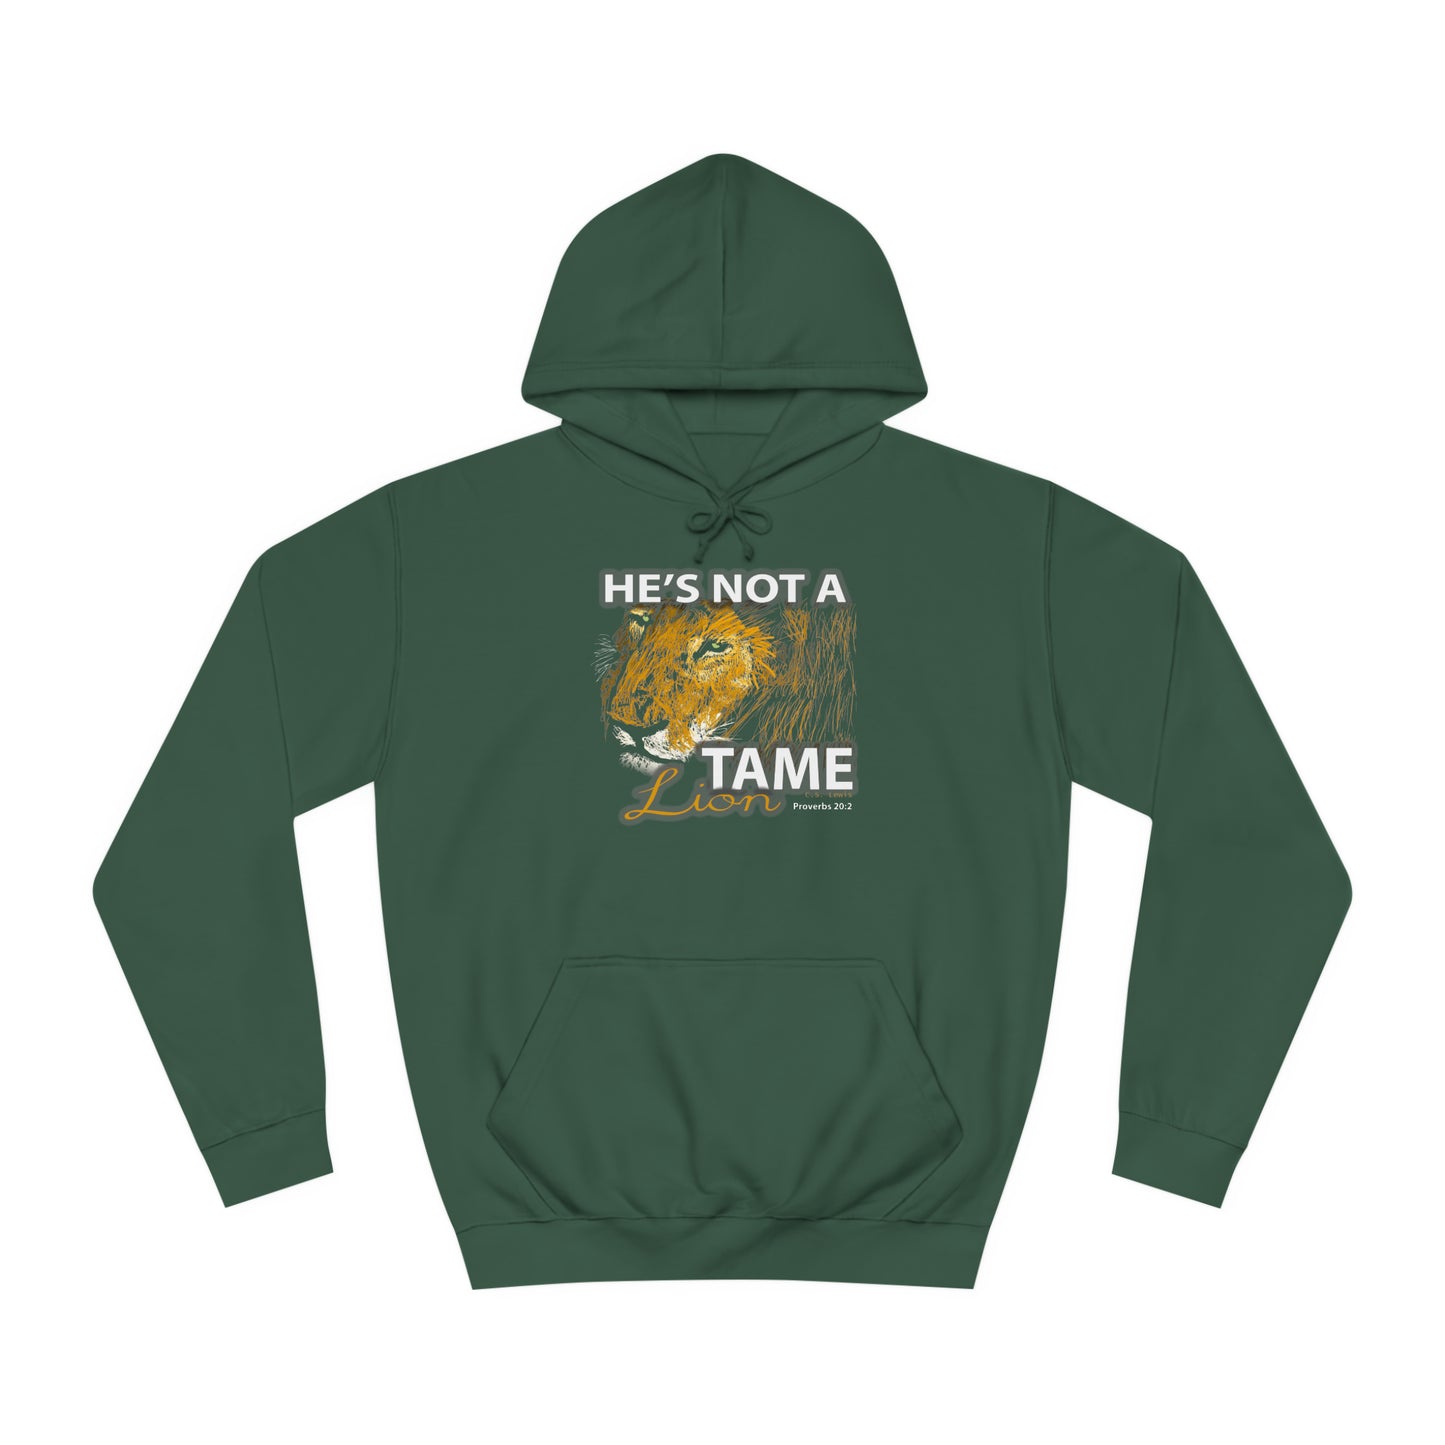 Not A Tame Lion College Hoodie